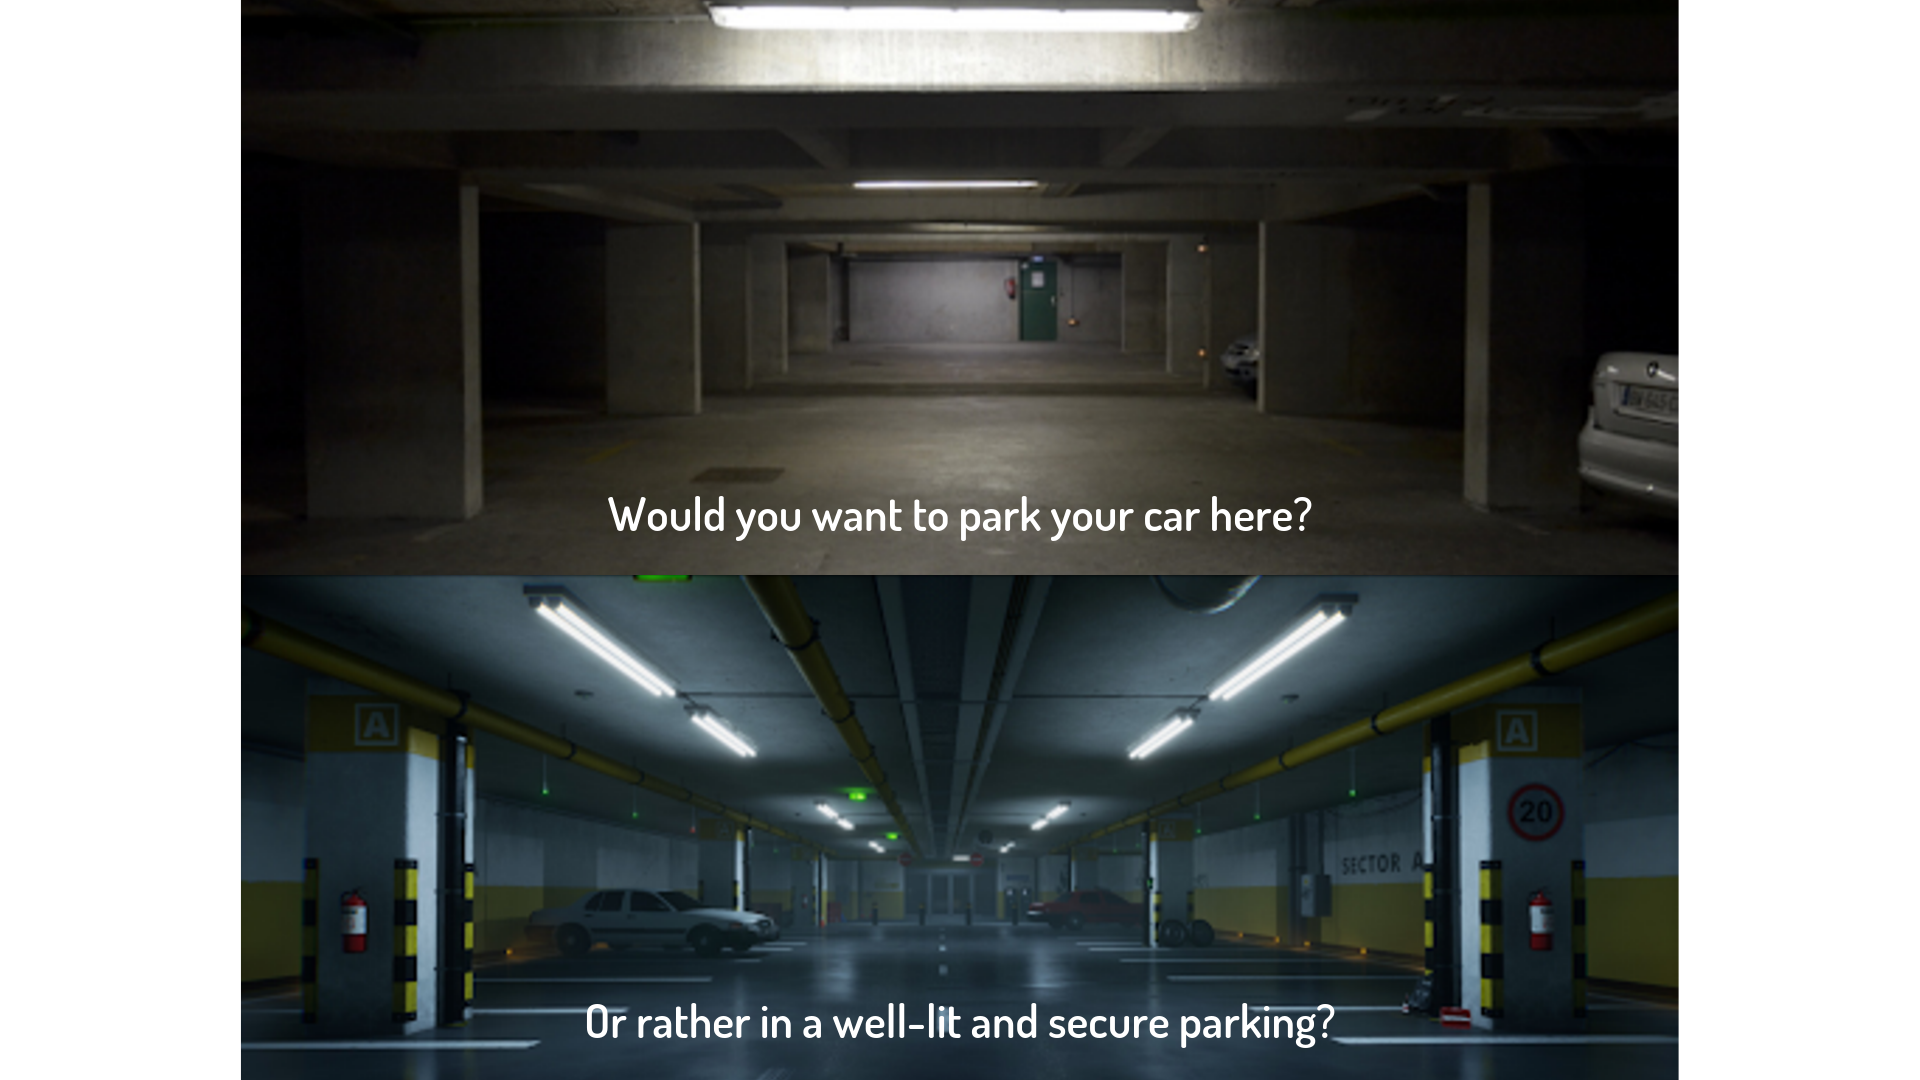 Would you park here or in a secure parking